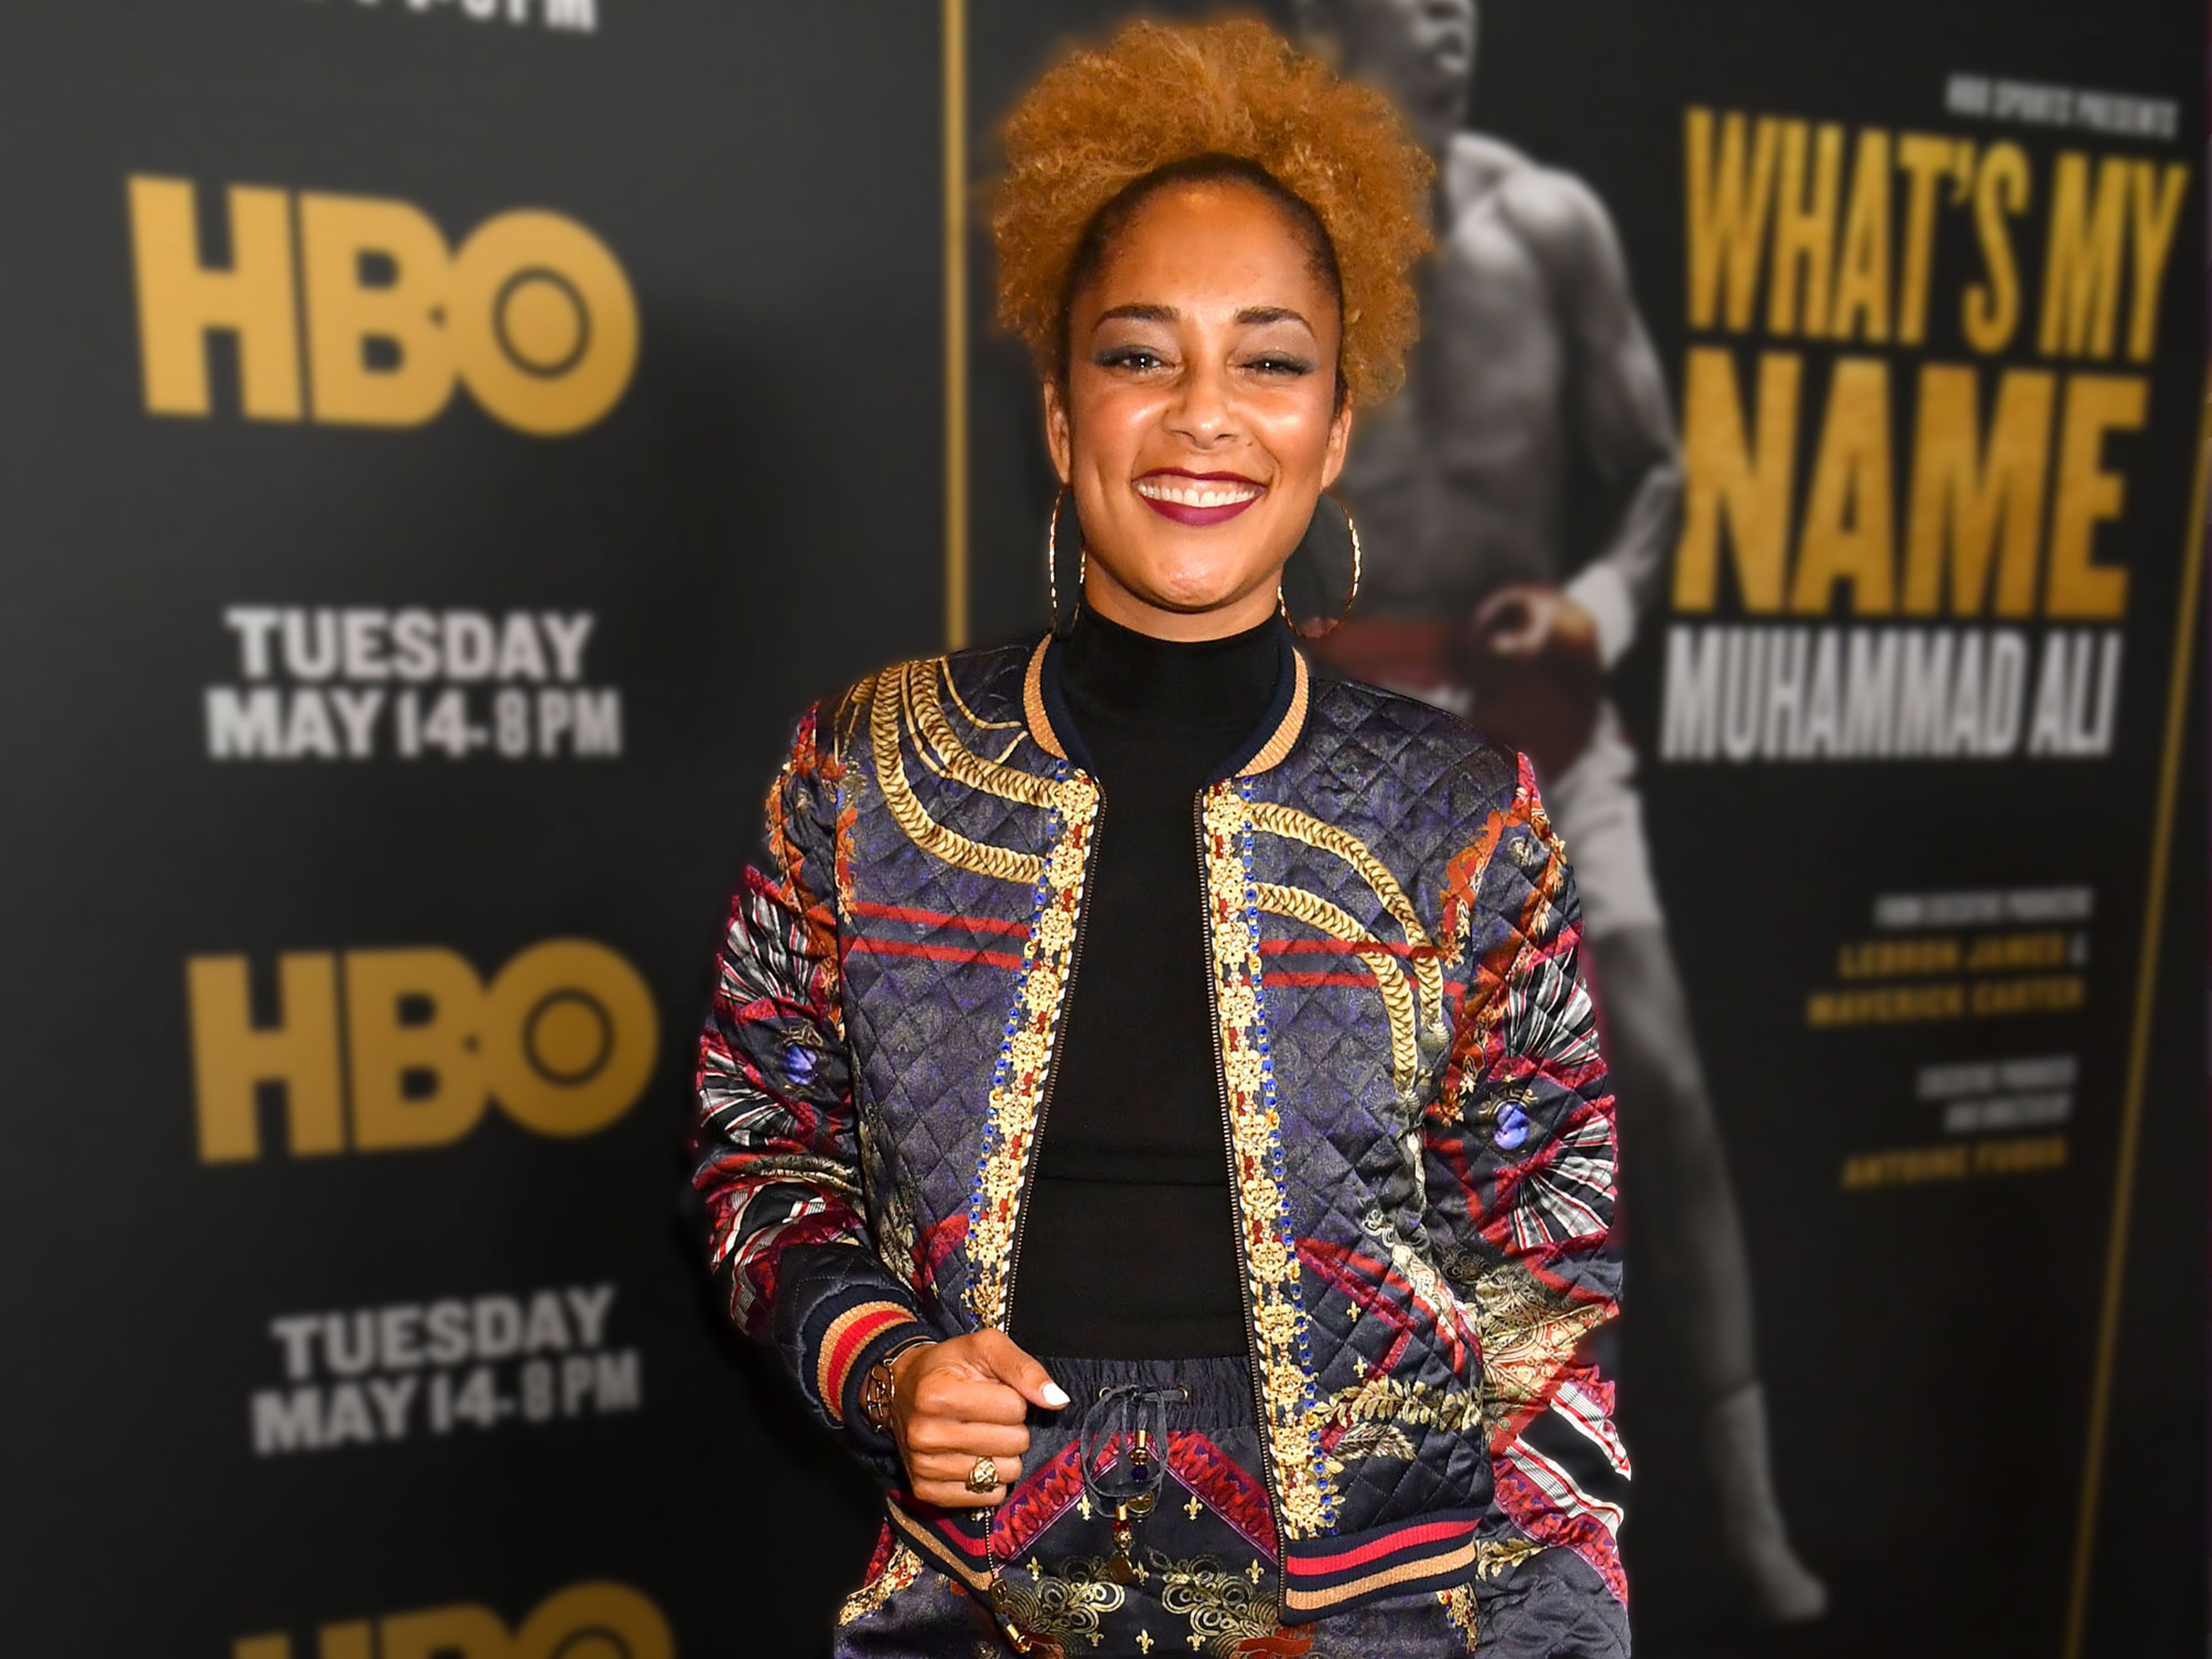 Amanda Seales, Laila Ali, Will Smith, And More Celebs Out And About